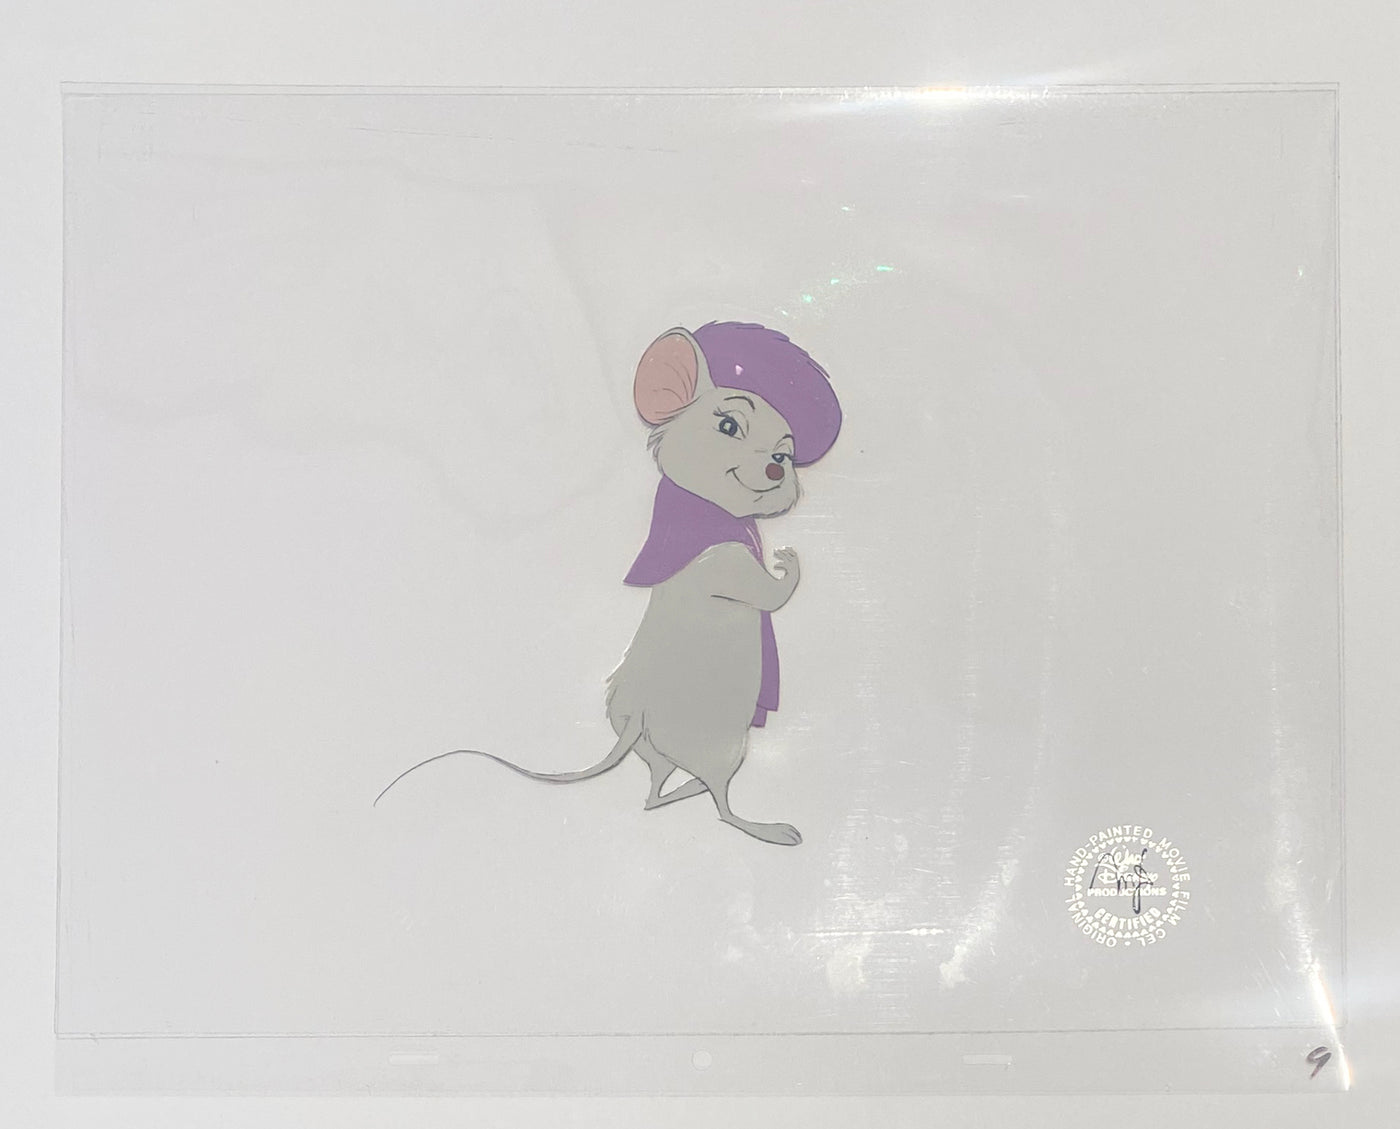 Original Walt Disney Production Cel from The Rescuers featuring Miss Bianca